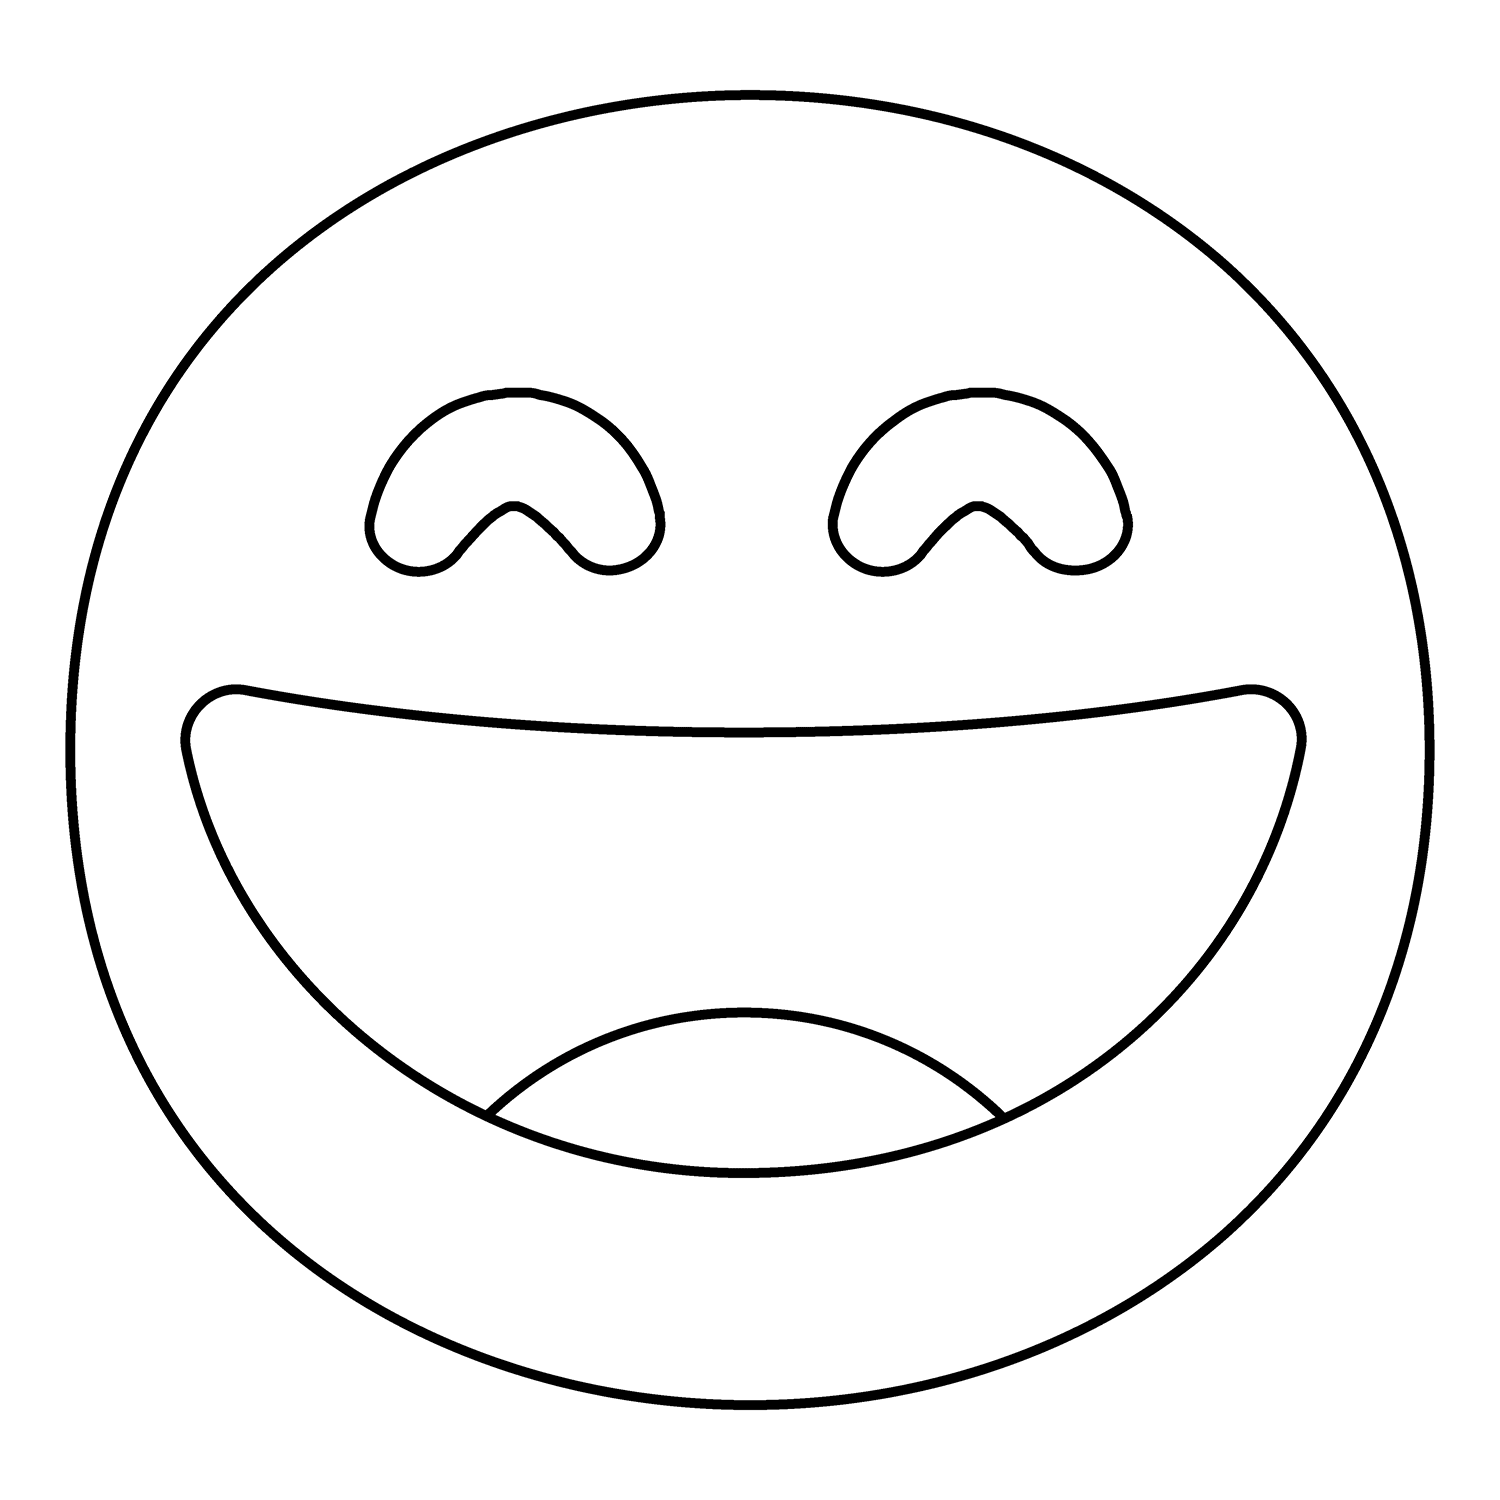 Grinning Face with Smiling Eyes Emoji coloring page - ColouringPages